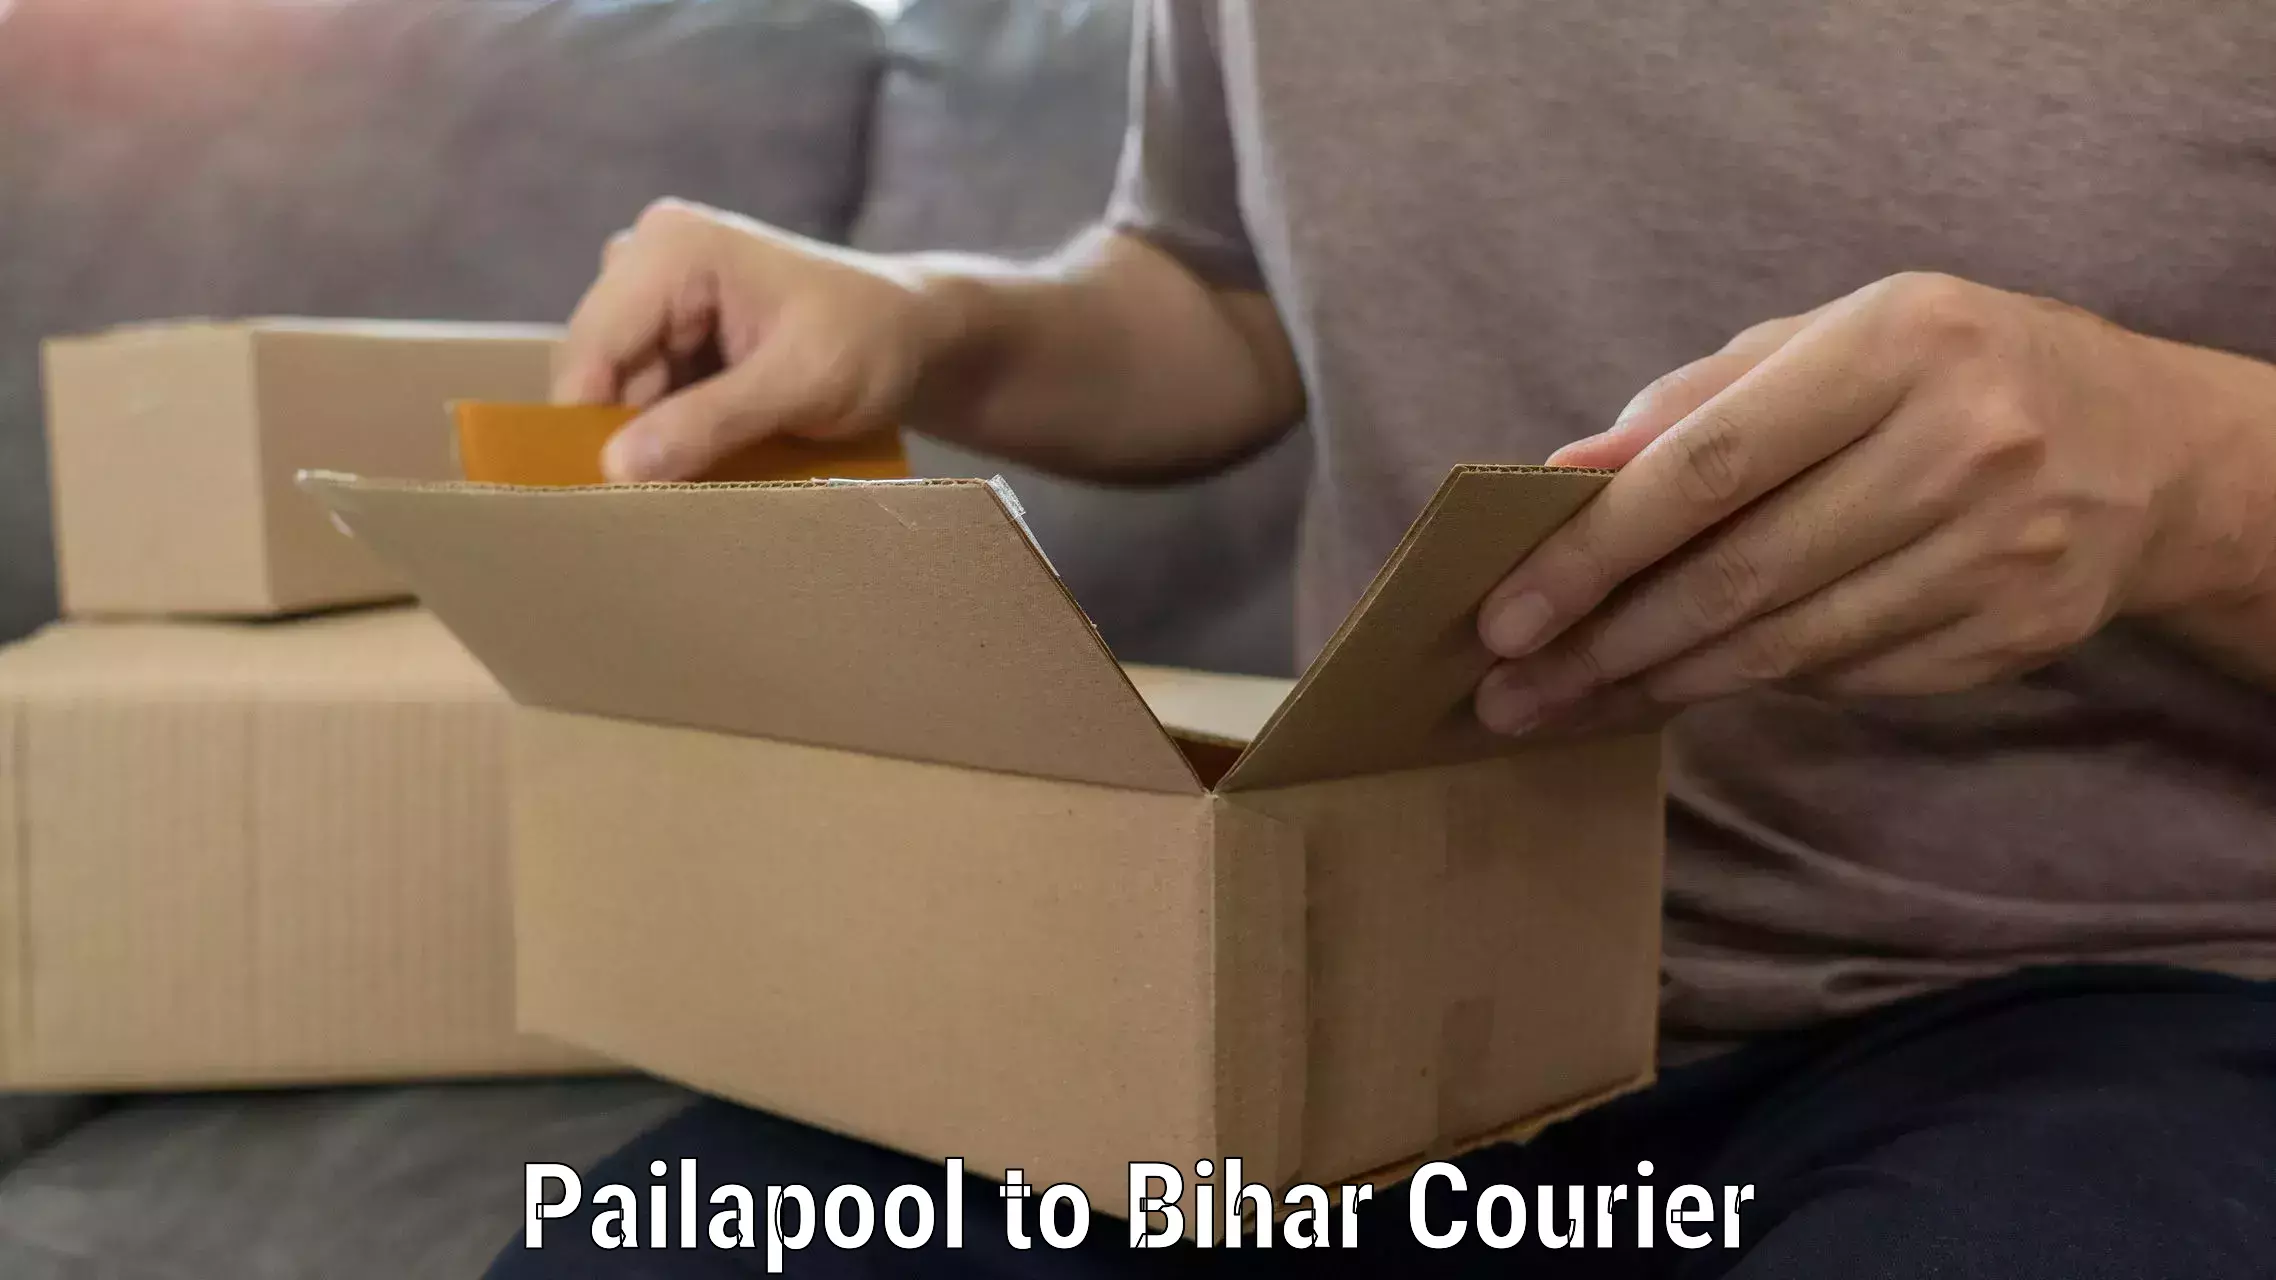 Quality relocation services in Pailapool to Madhepura